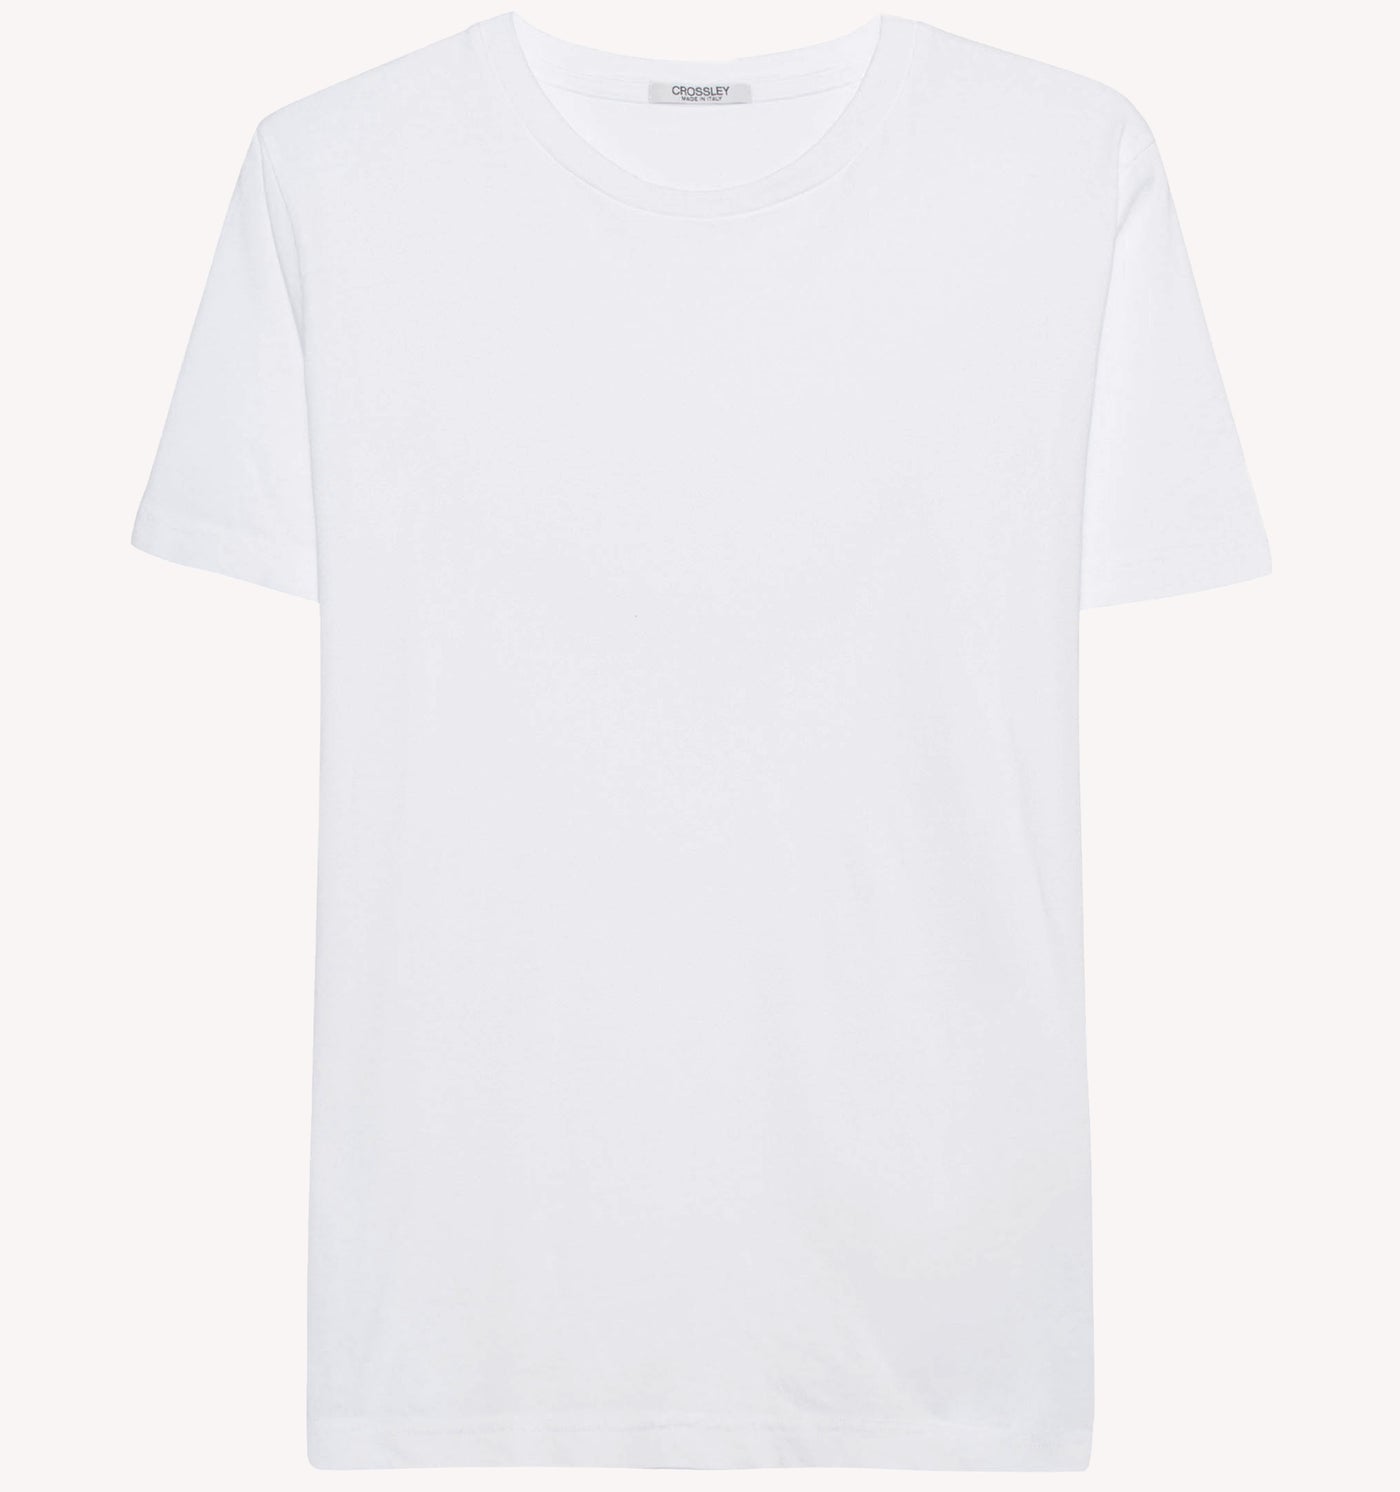 Crossley T-shirt in White